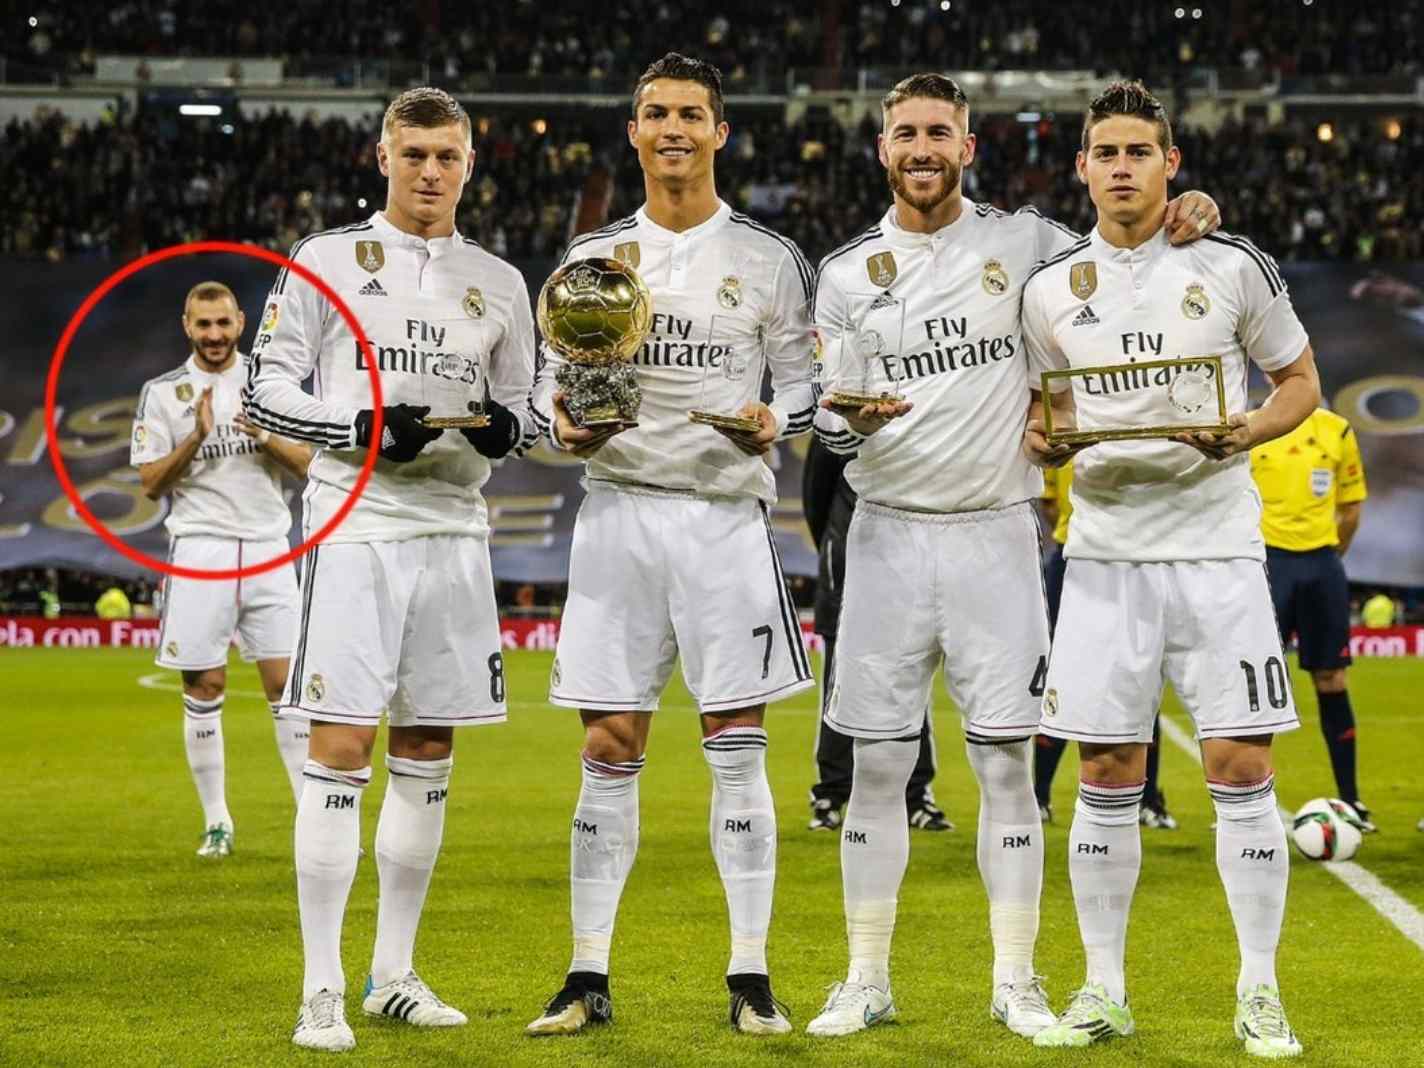 Old photo of Karim Benzema clapping for celebrity Real Madrid players sums up his journey to stardom